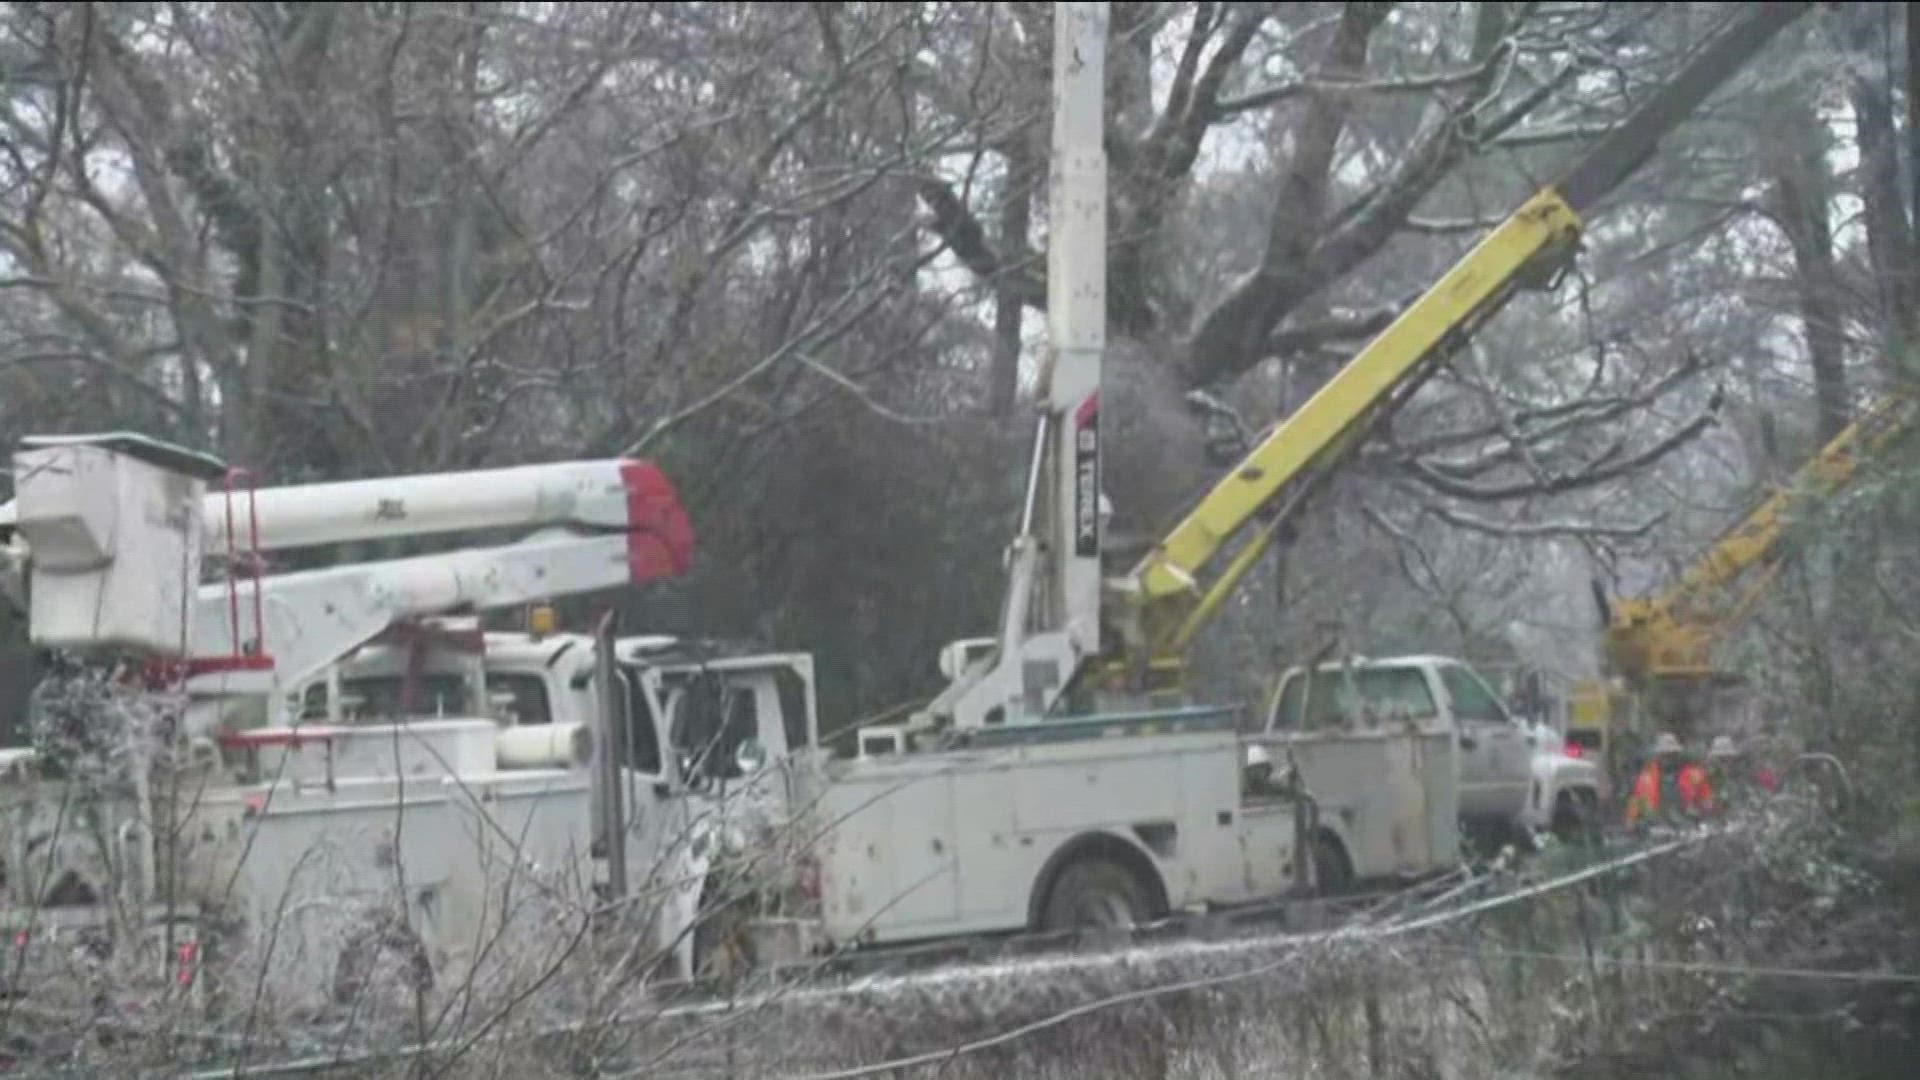 In Lawrenceville, power crews are working to restore some downed power lines.